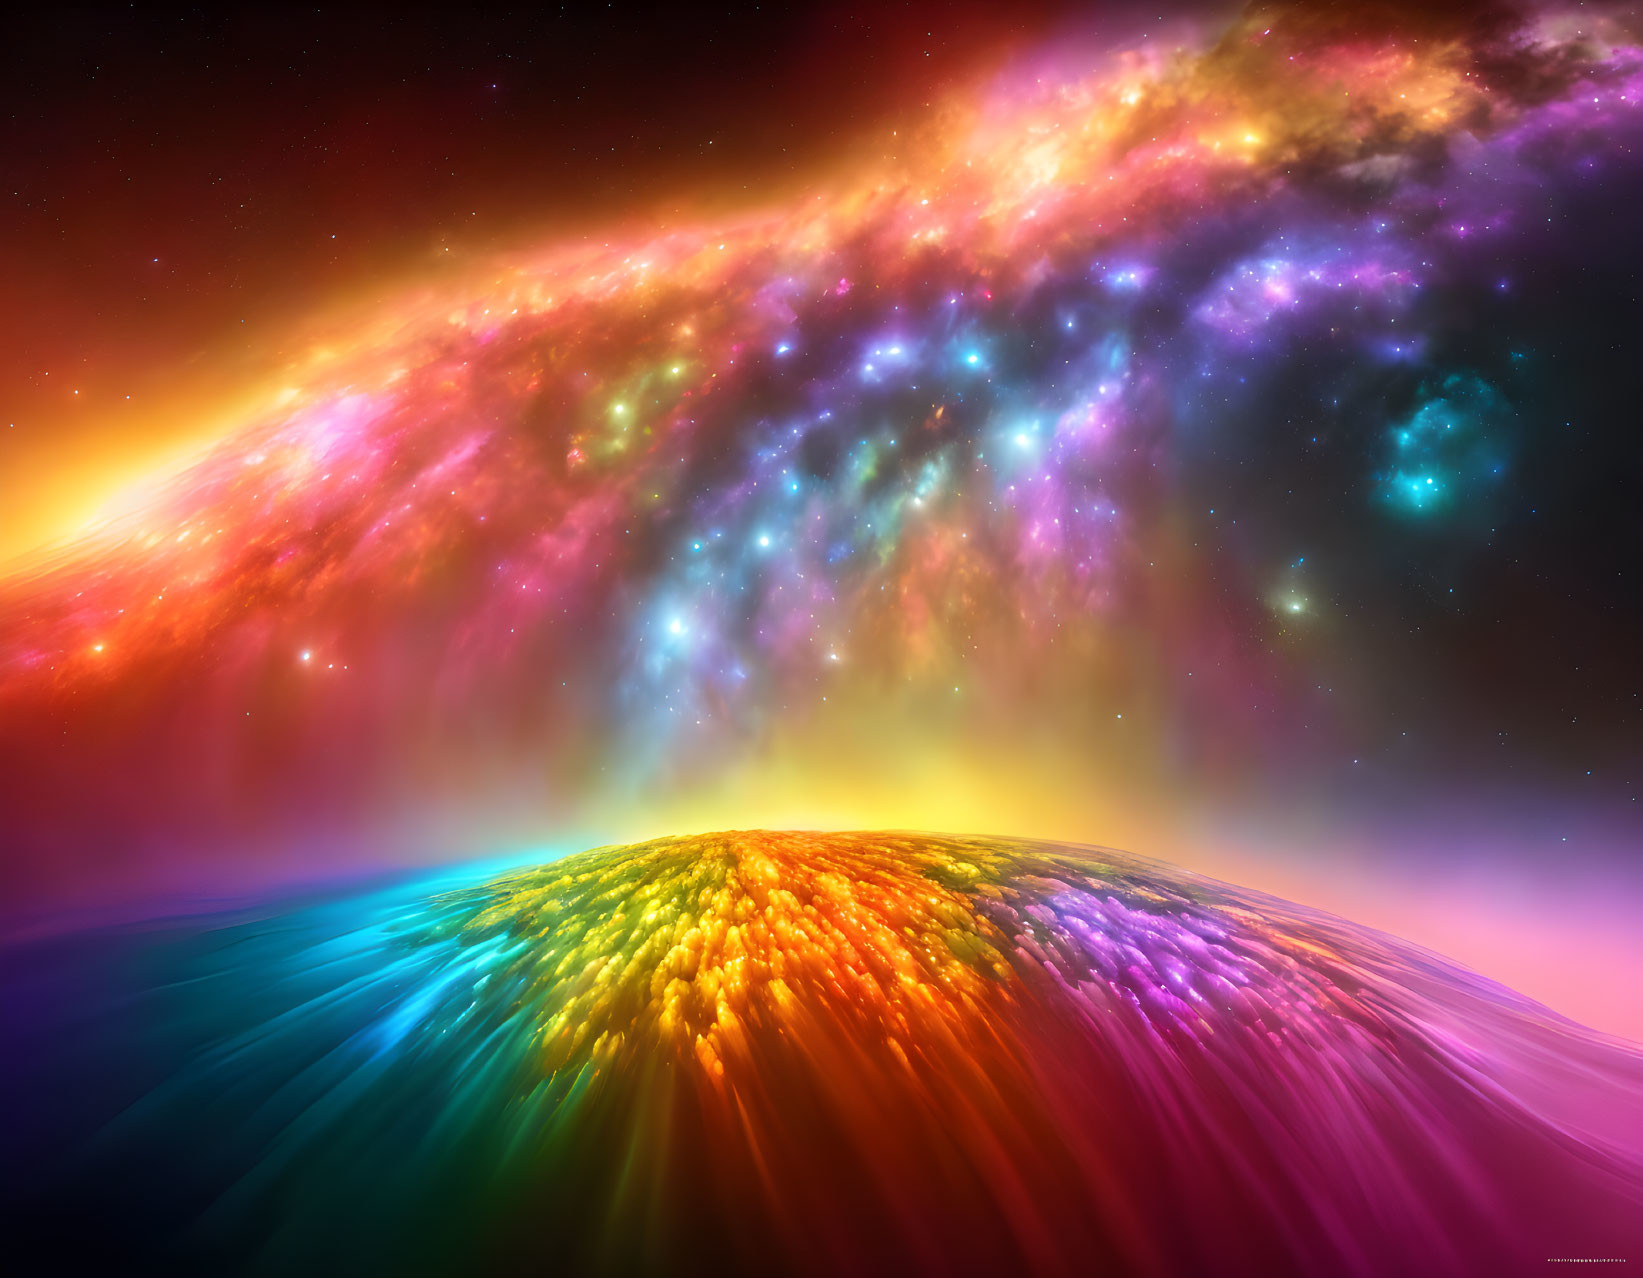 Colorful Cosmic Scene with Nebula and Rainbow Planet Surface